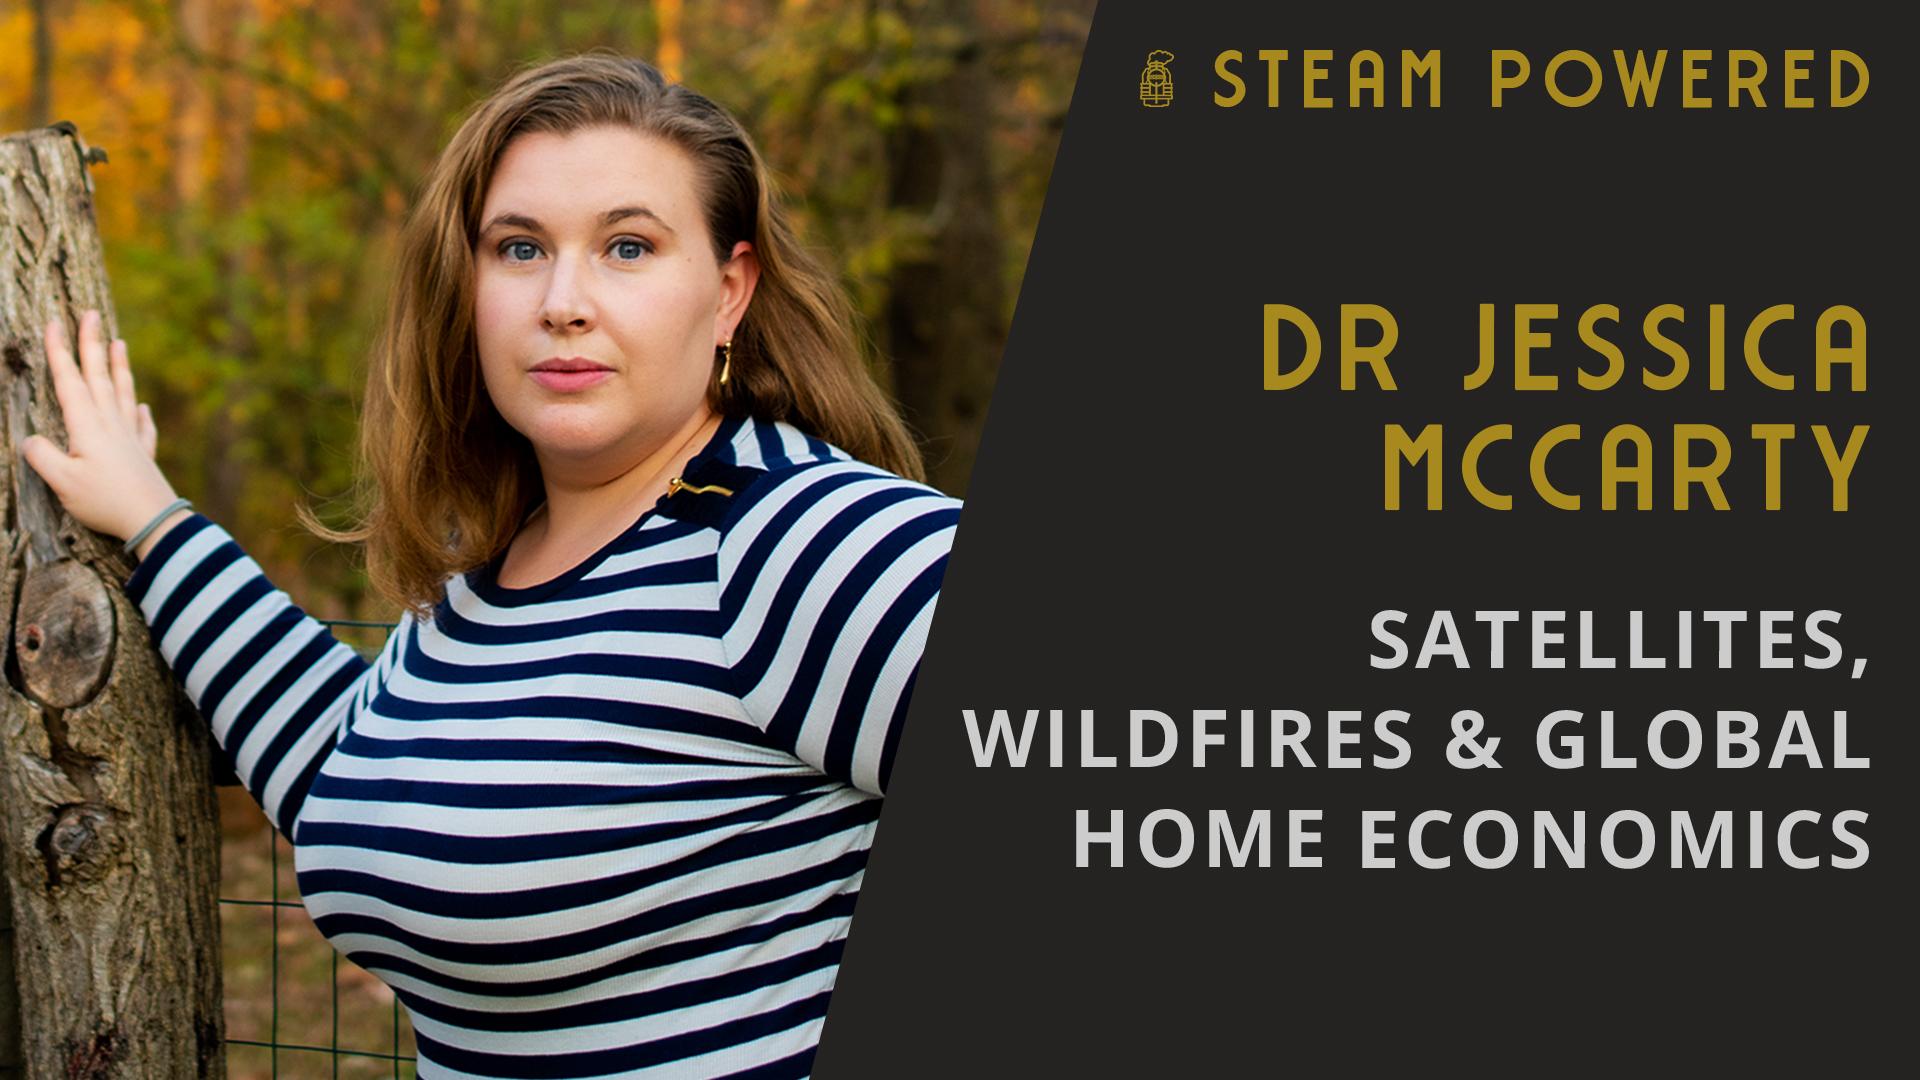 Satellites, Wildfires, and Geography as Home Economics on a Global Scale